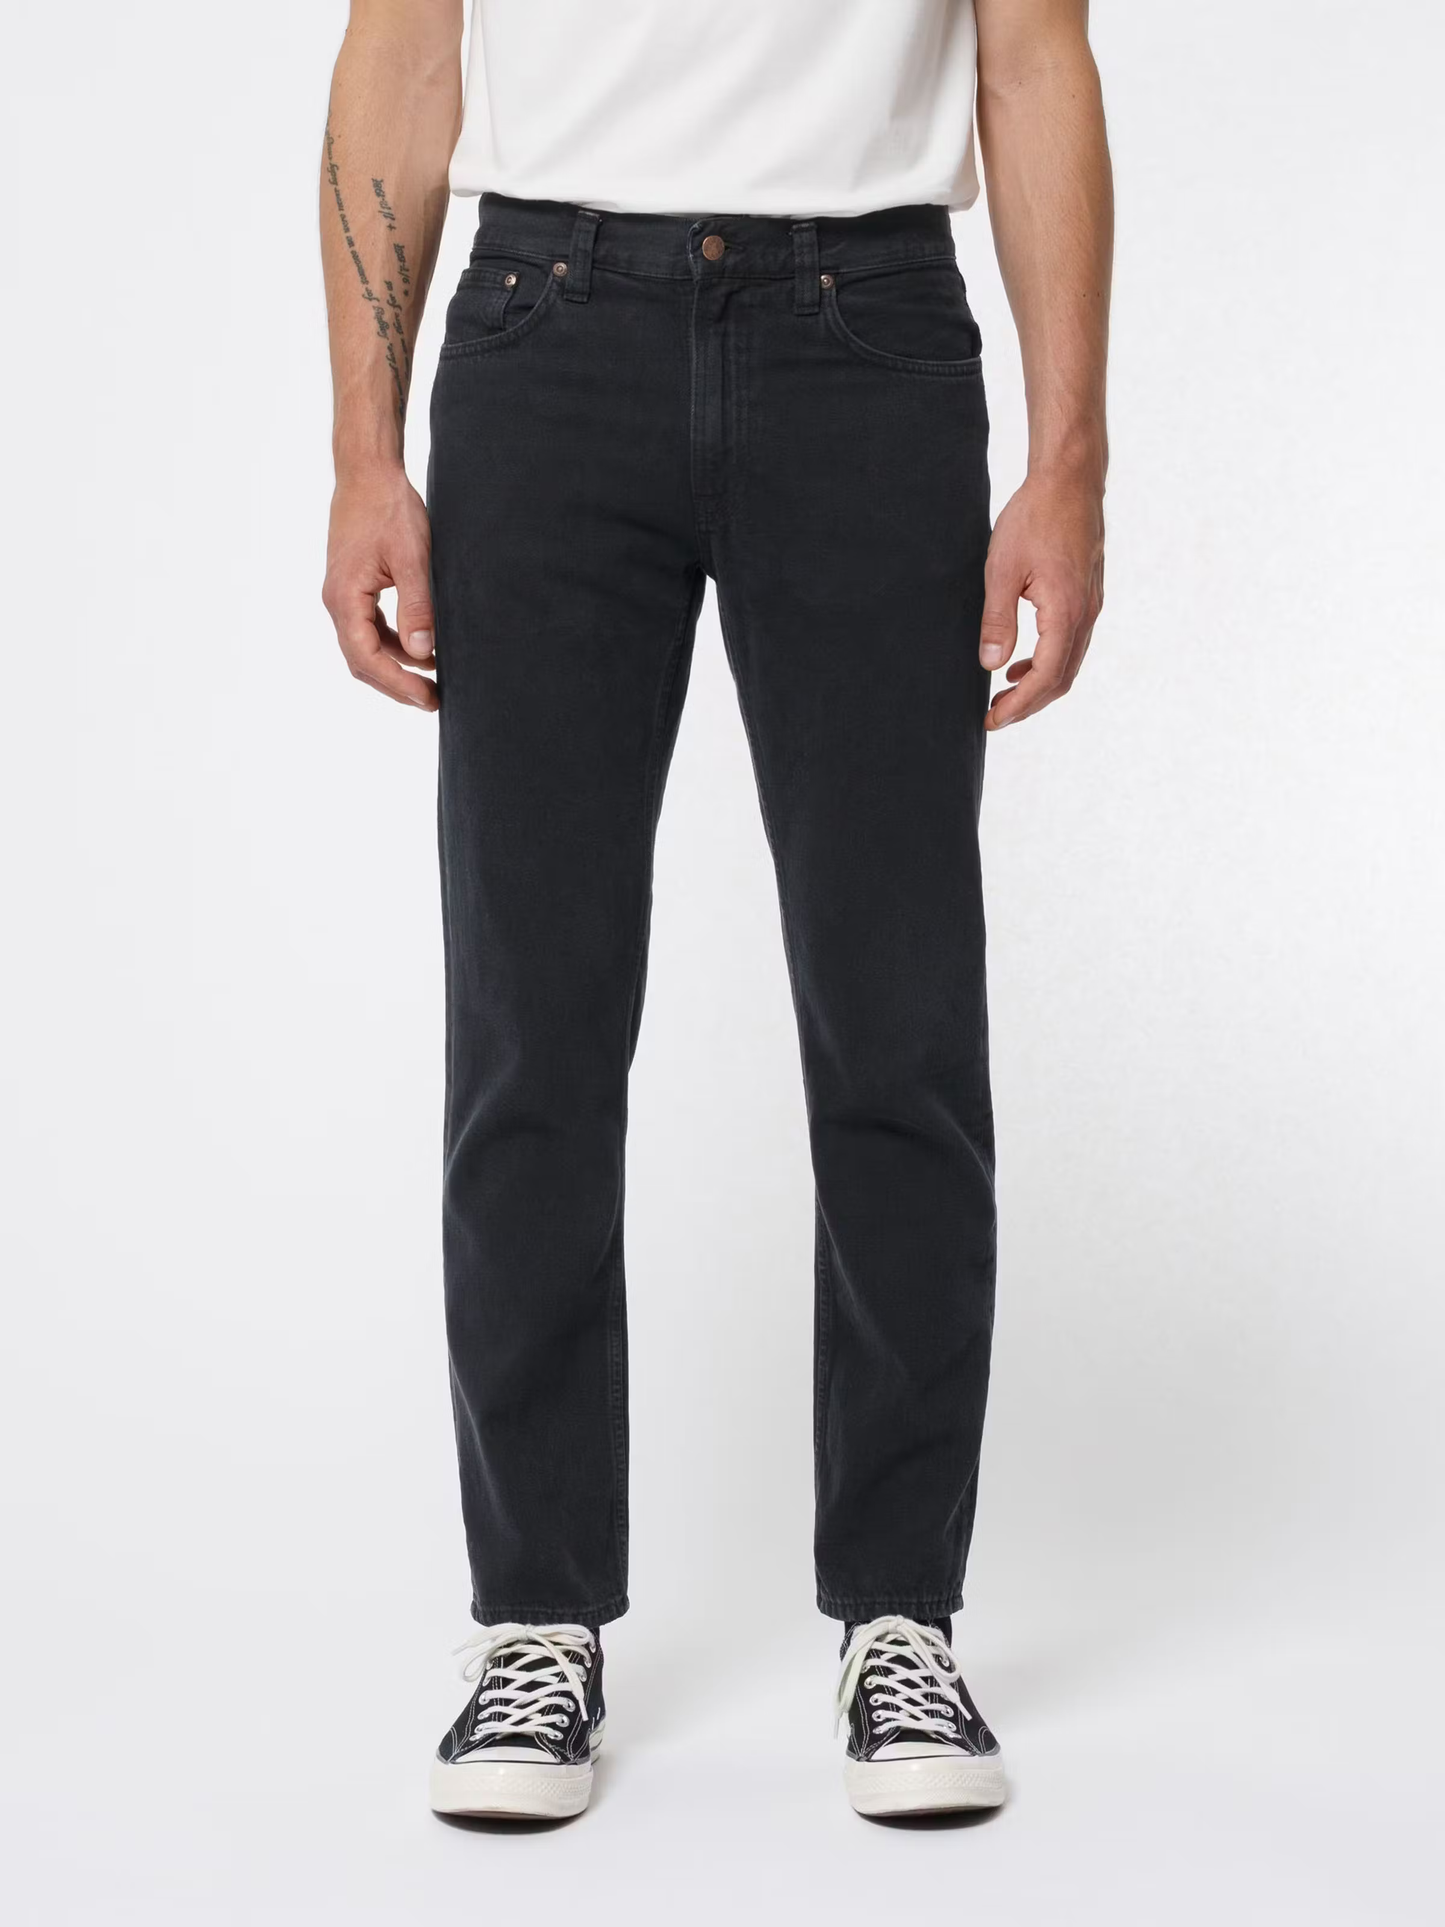 Nudie Jeans Gritty Jackson Jean L34 Black Forest